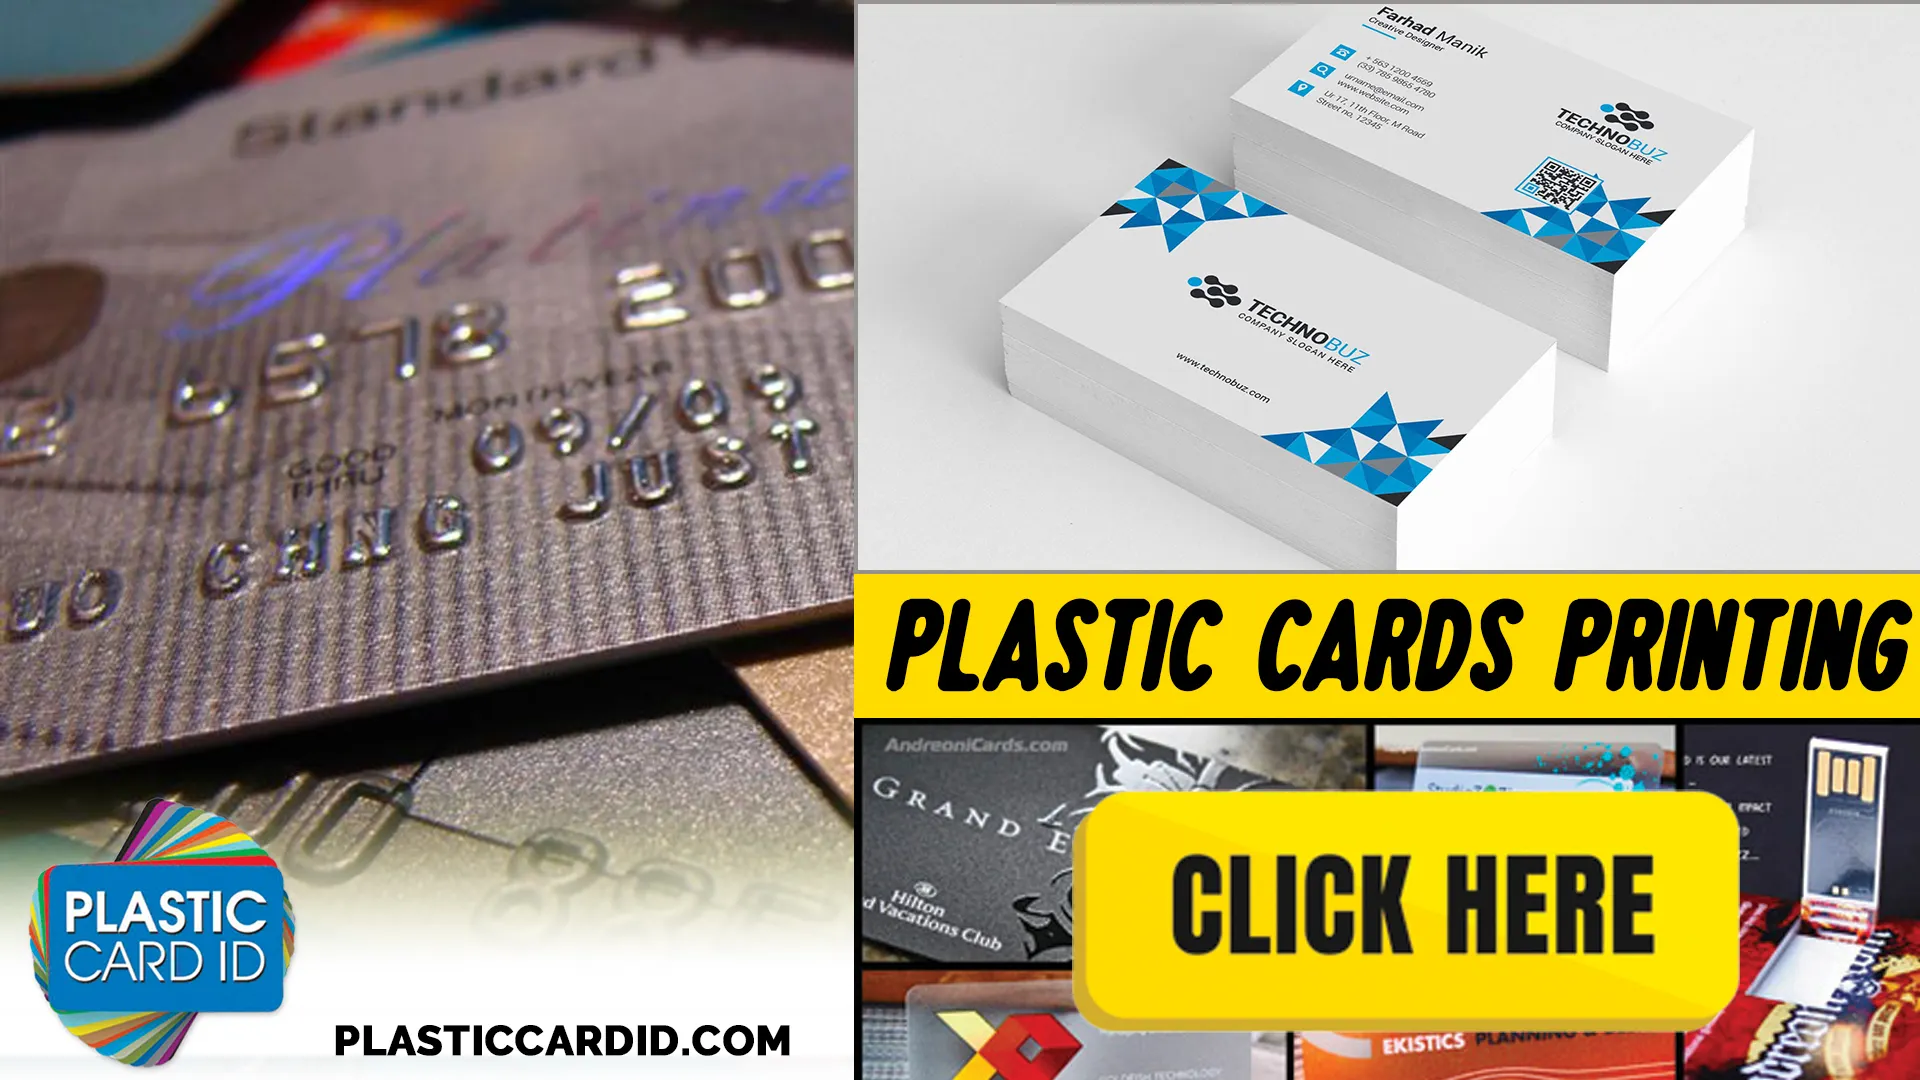 Why Litho Printing is Superior for Your Plastic Card Needs